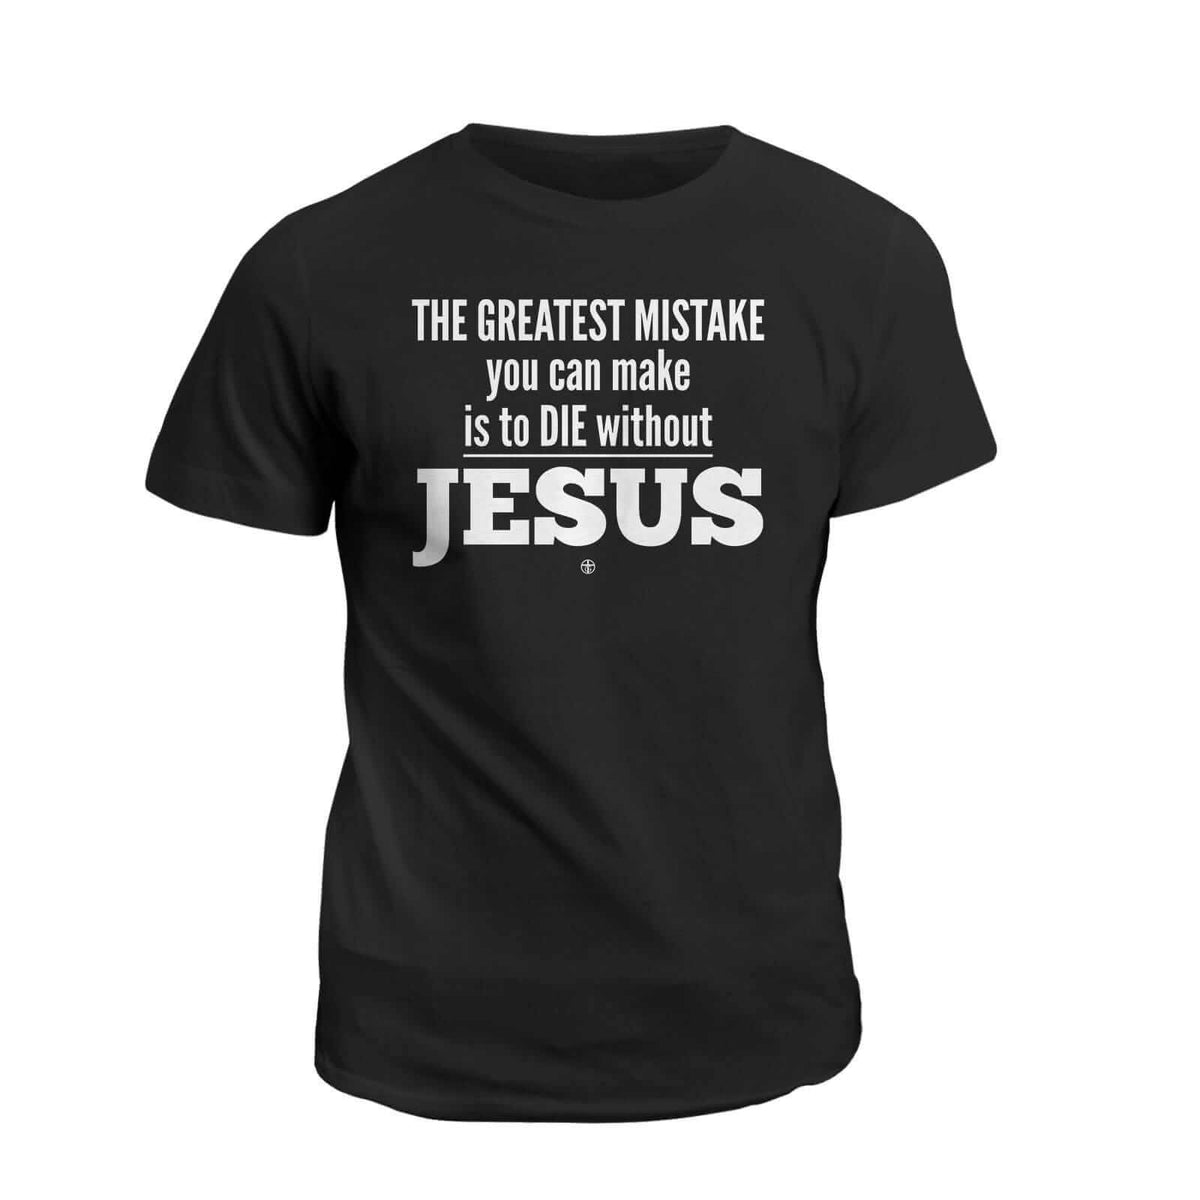 THE GREATEST MISTAKE you can make is to DIE without JESUS